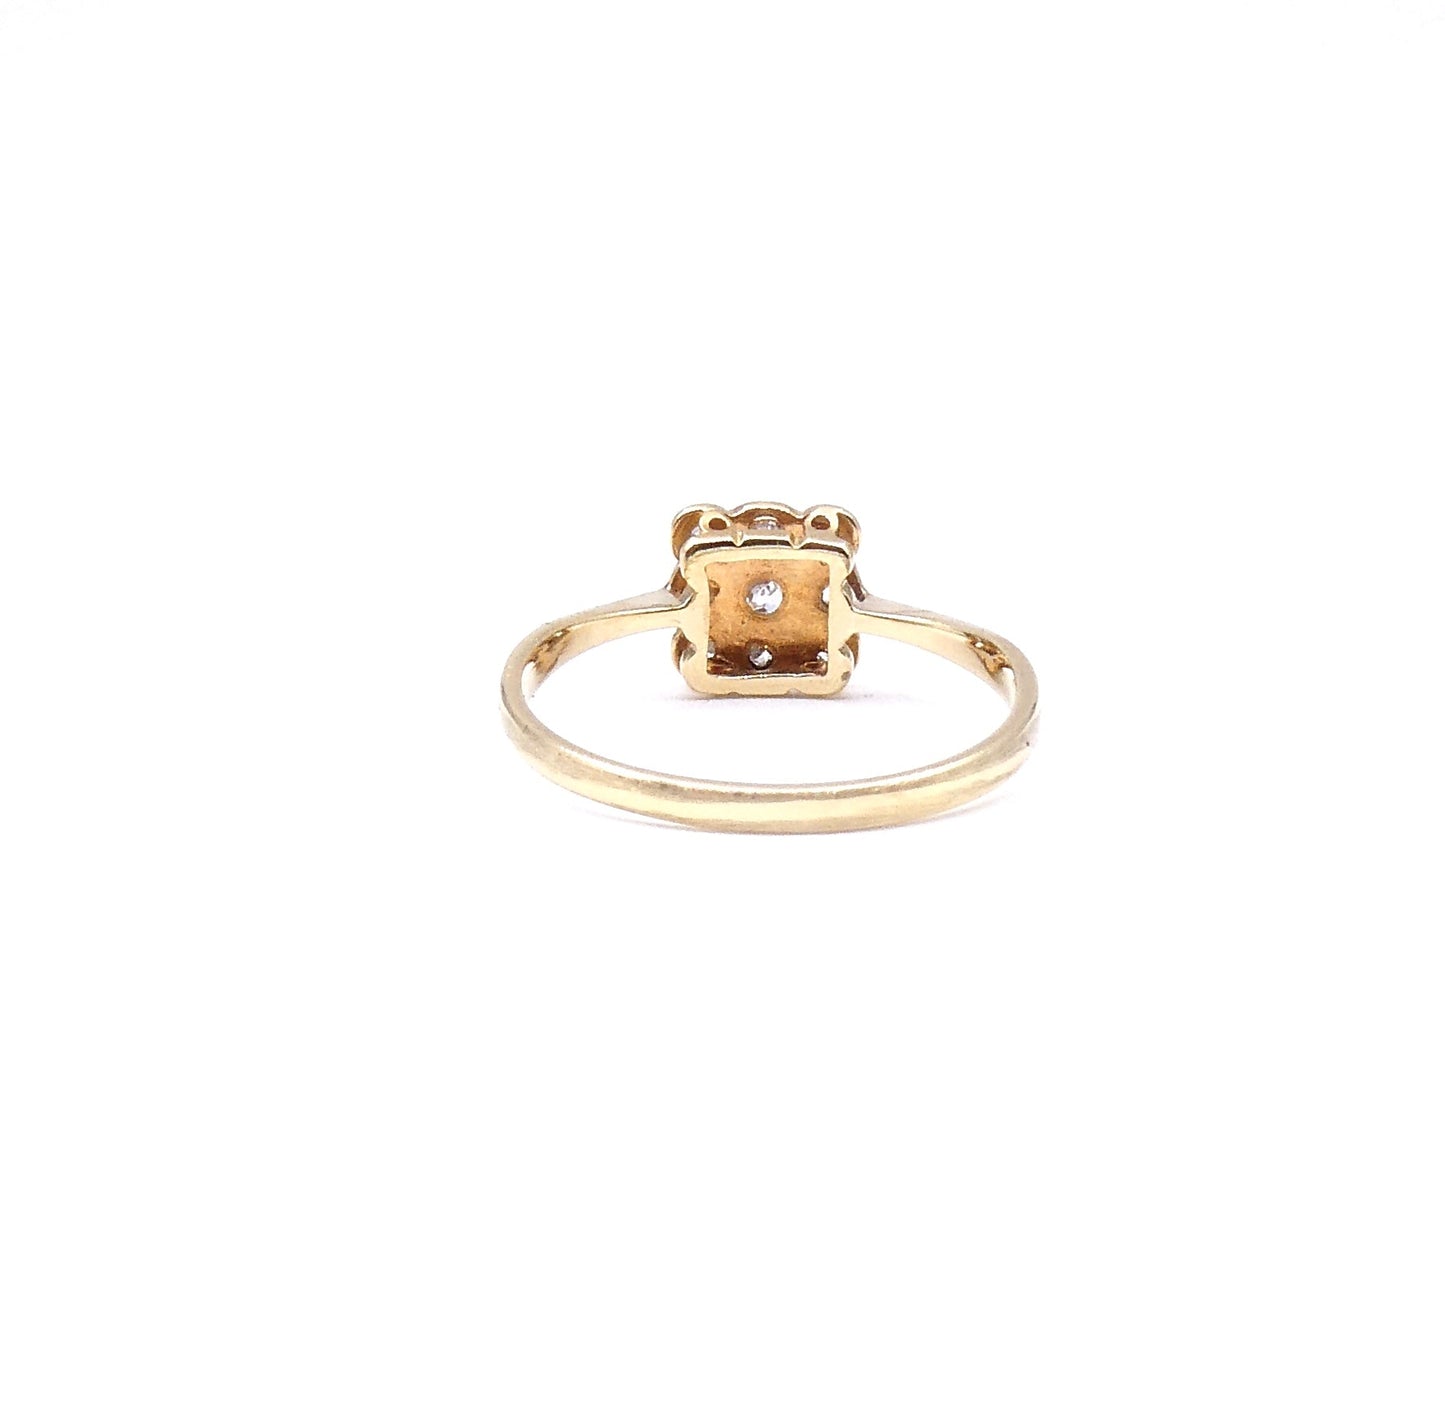 Vintage diamond checkerboard ring, a delicate diamond, platinum and 18kt gold ring. - Collected